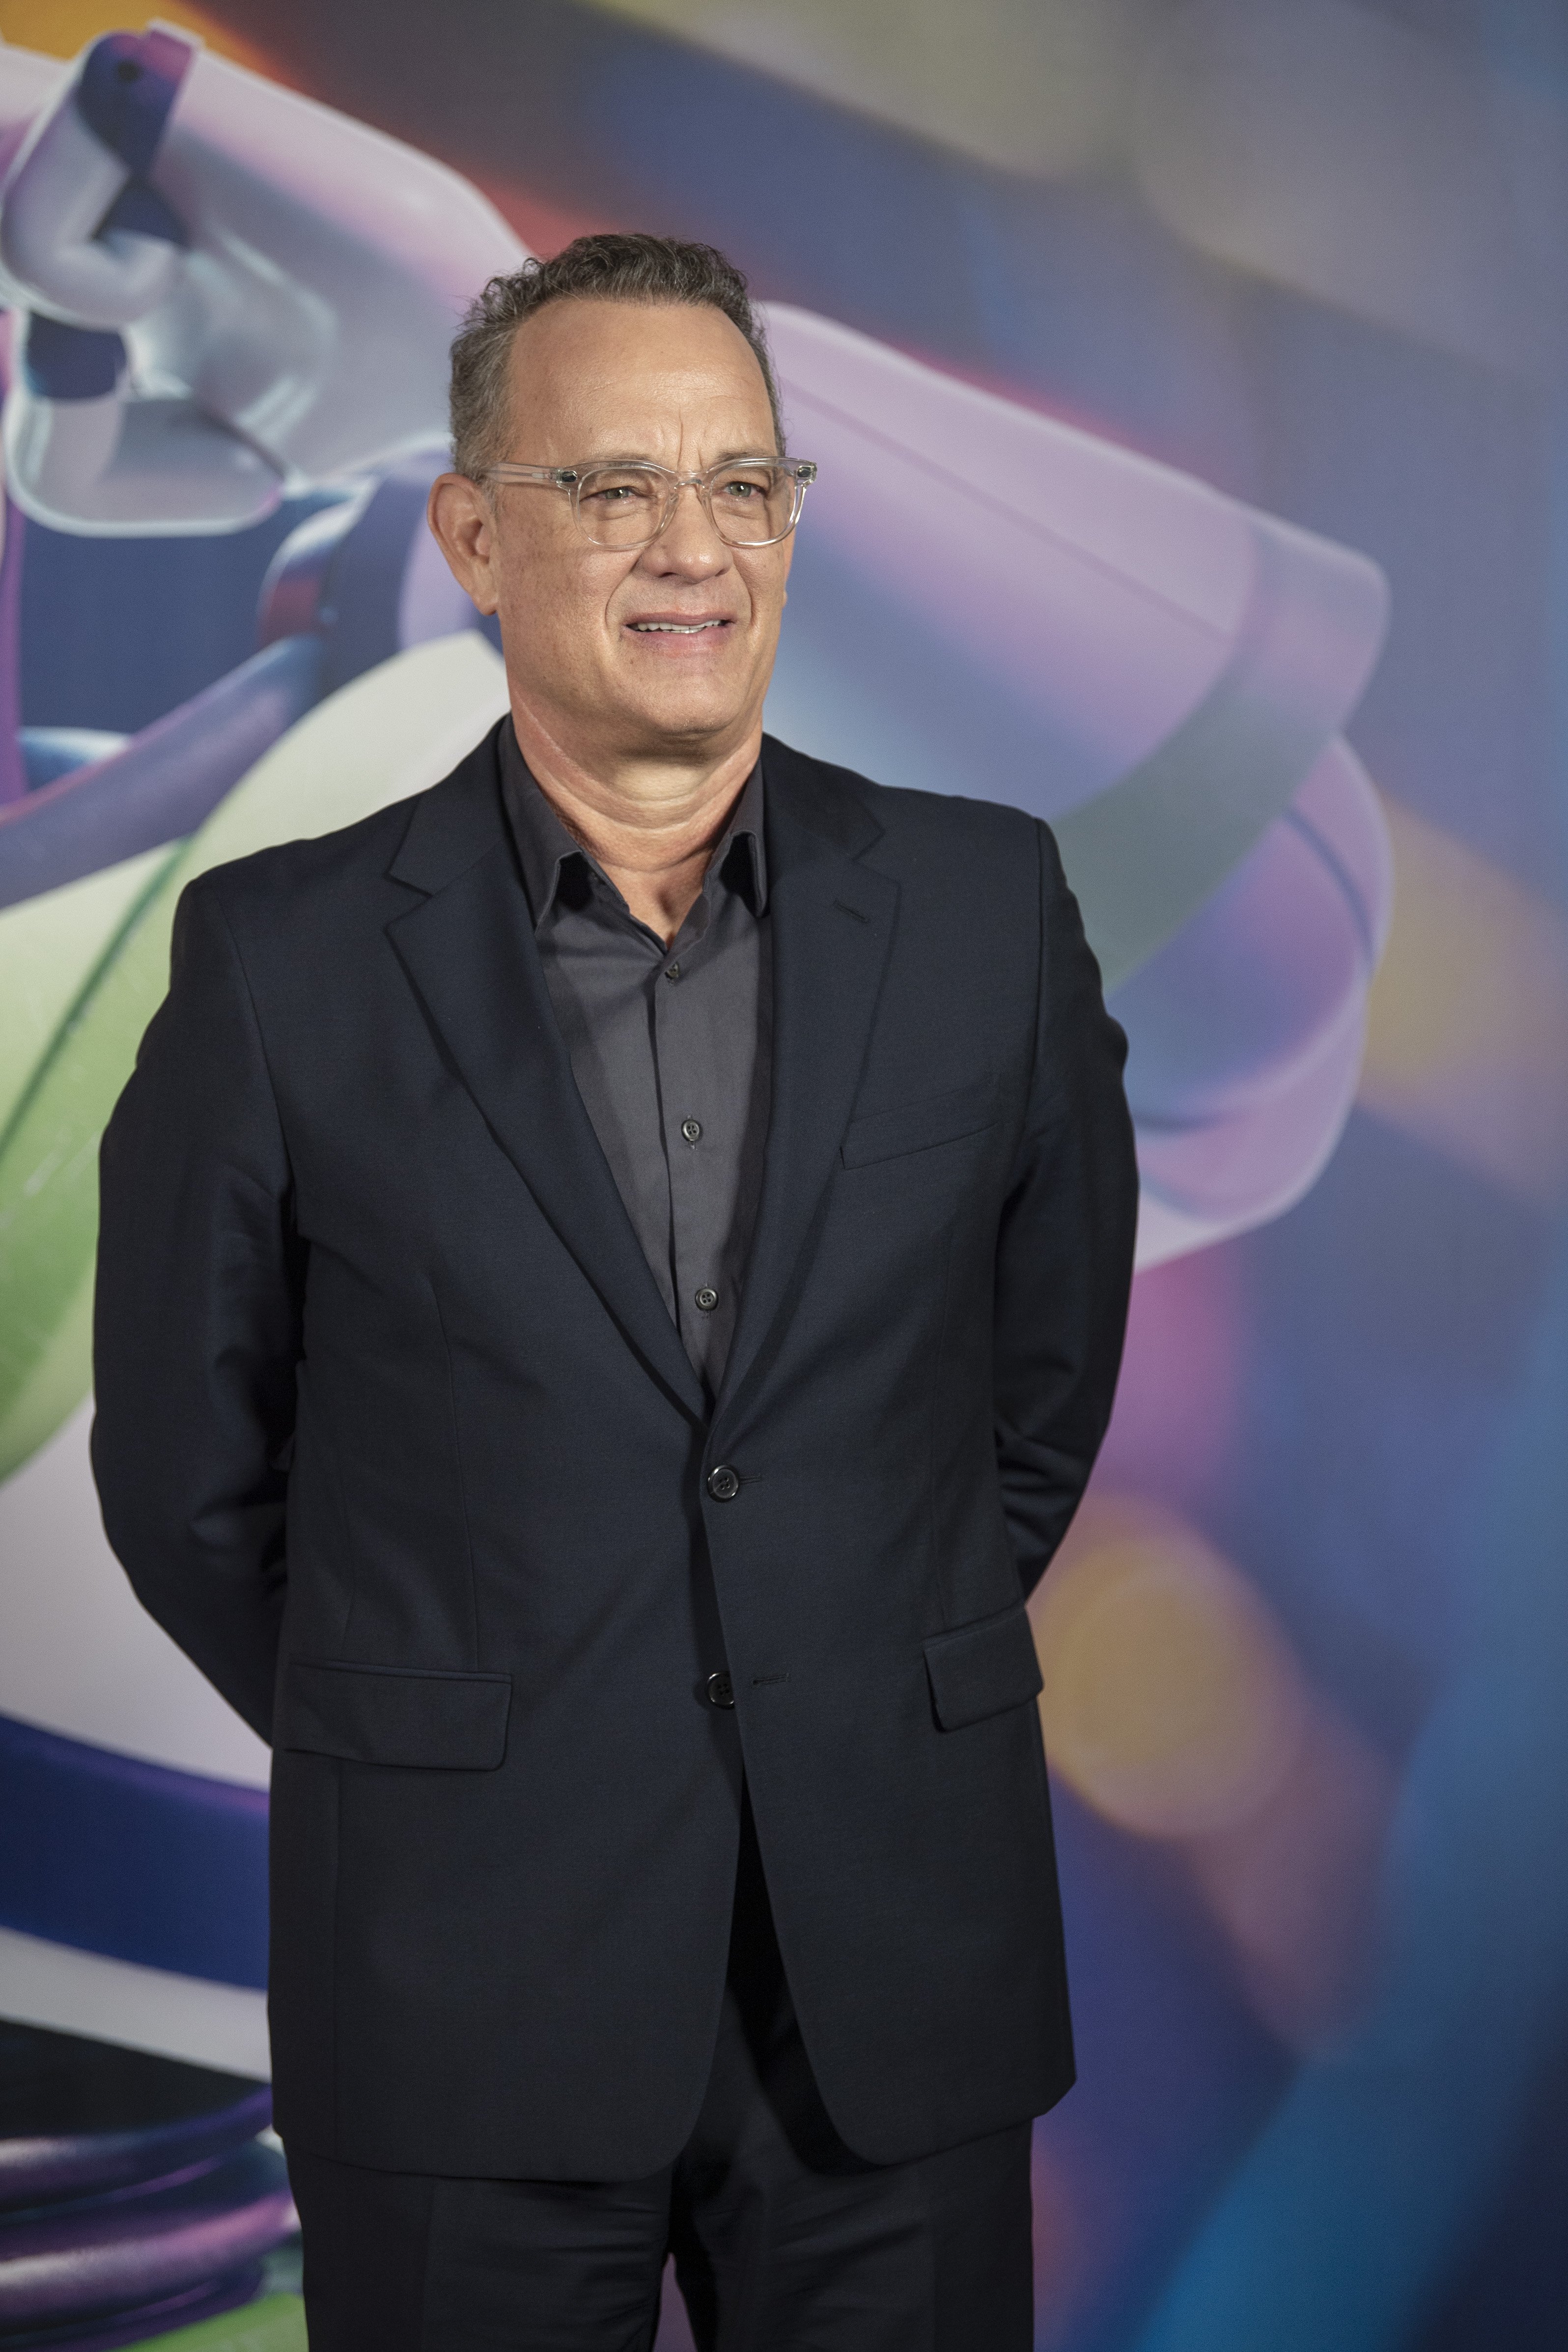 Tom Hanks attends the 'Toy Story 4' photocall on June 19, 2019, in Barcelona, Spain. | Source: Getty Images.